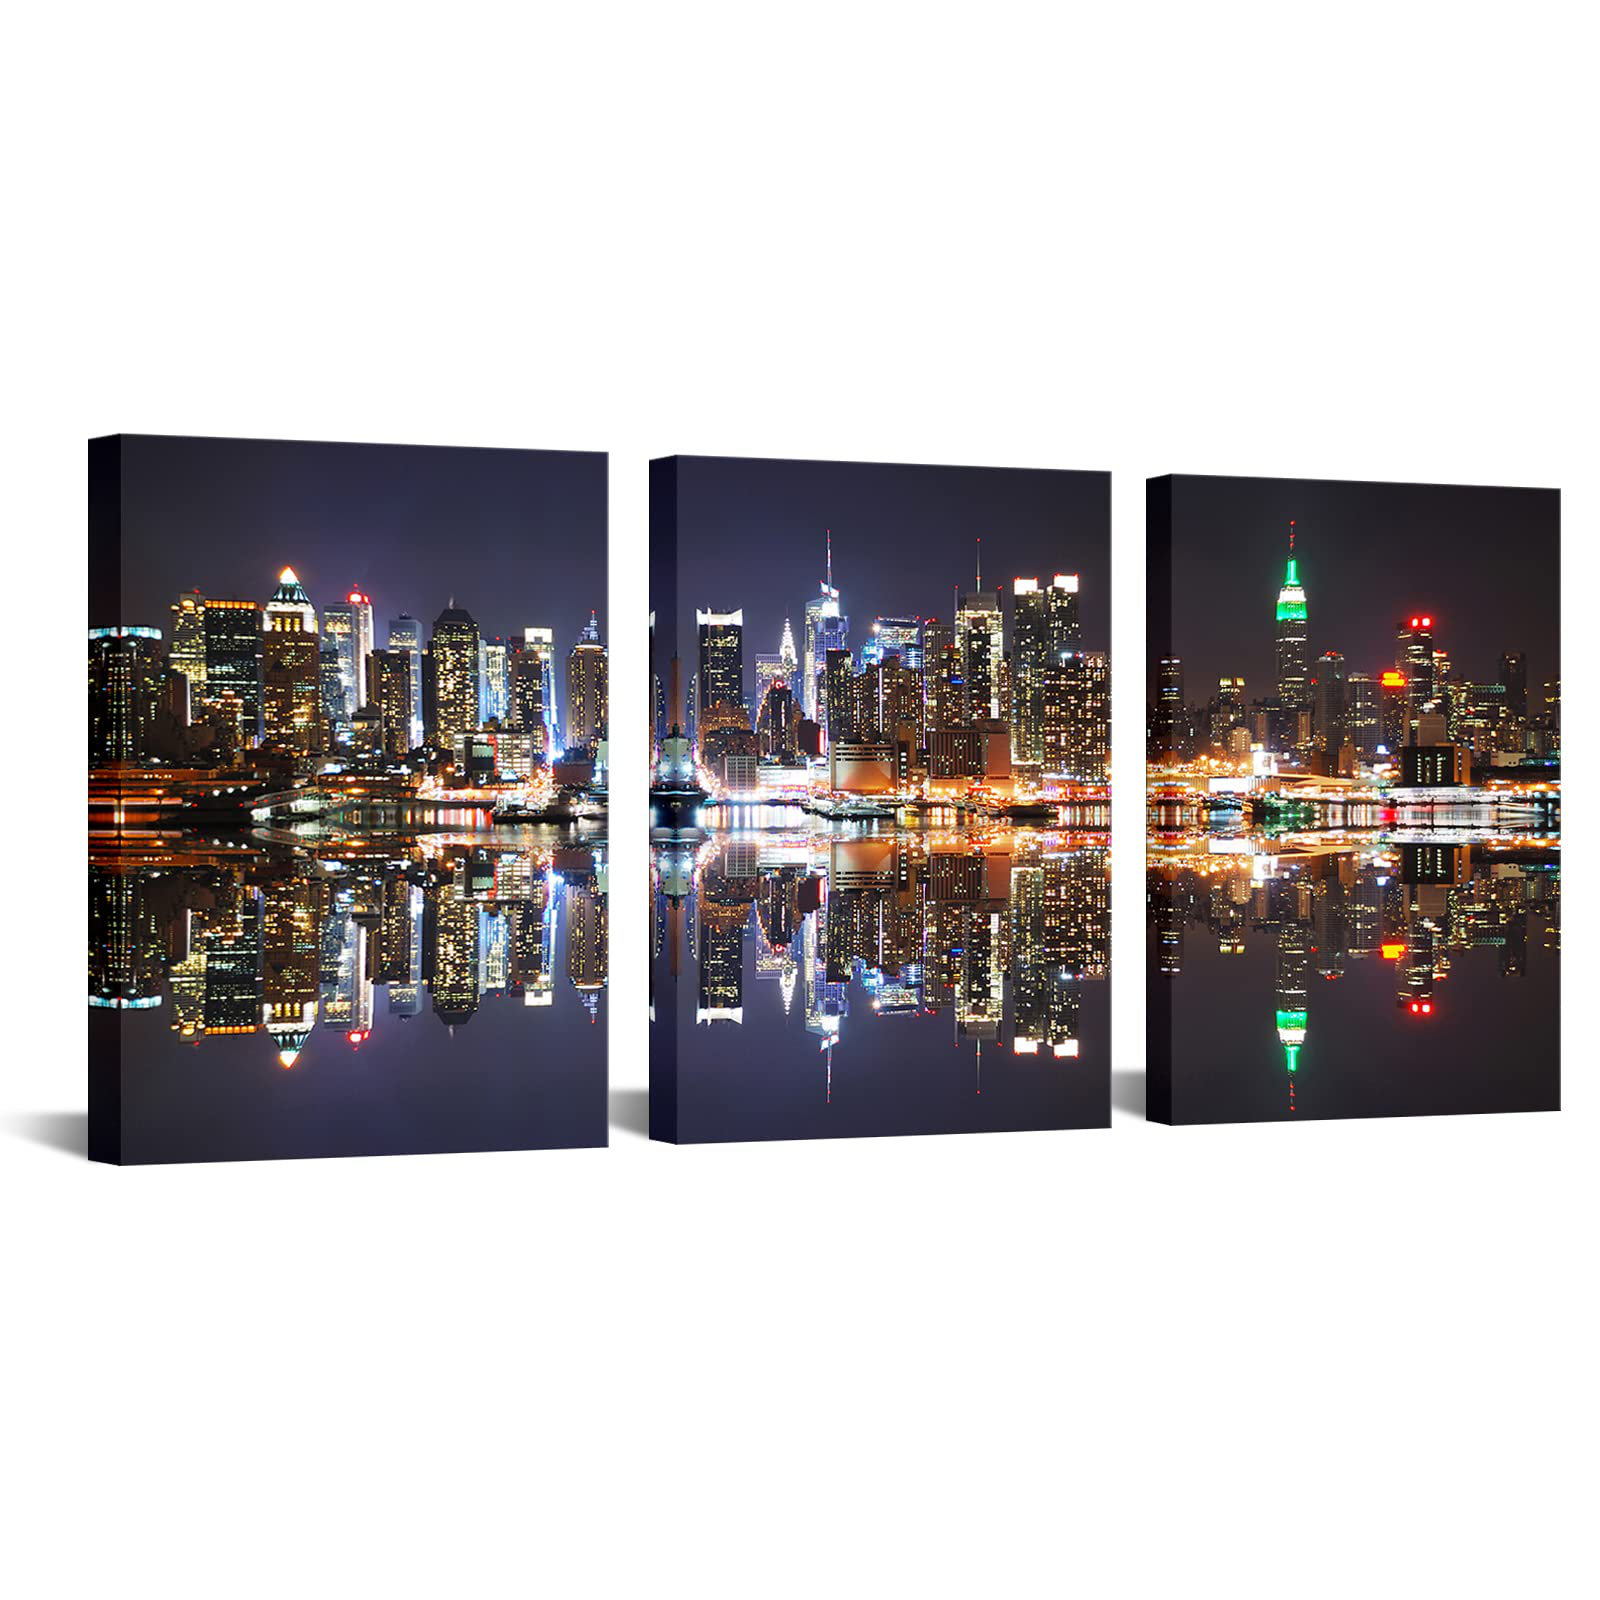 NYC Skyline/MANHATTAN ready to hang framed canvas wall art/better than stretched 